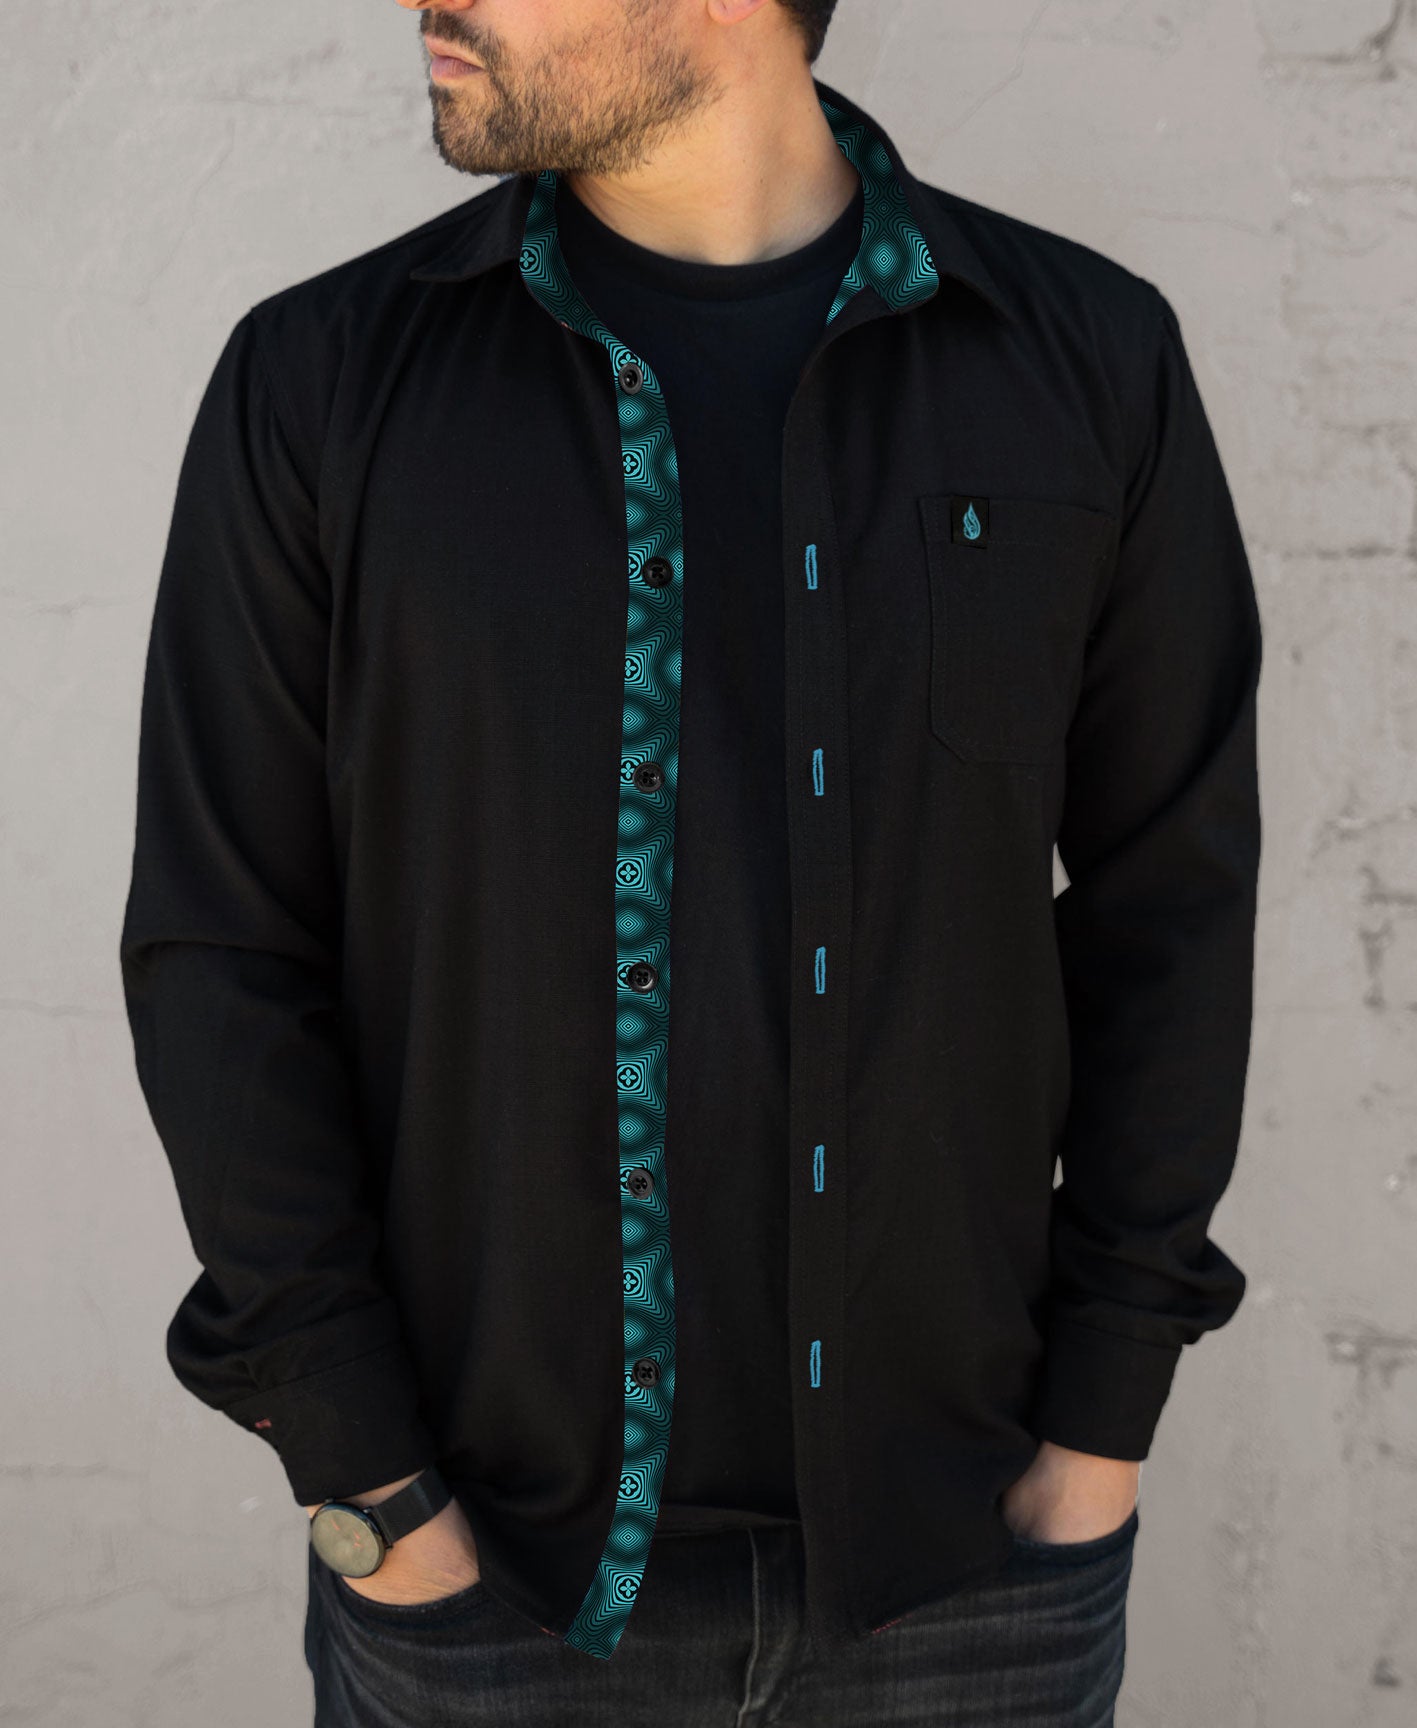 Evaporate Lined Button Down Shirt by Threyda - Exclusive Presale SHIPS APRIL